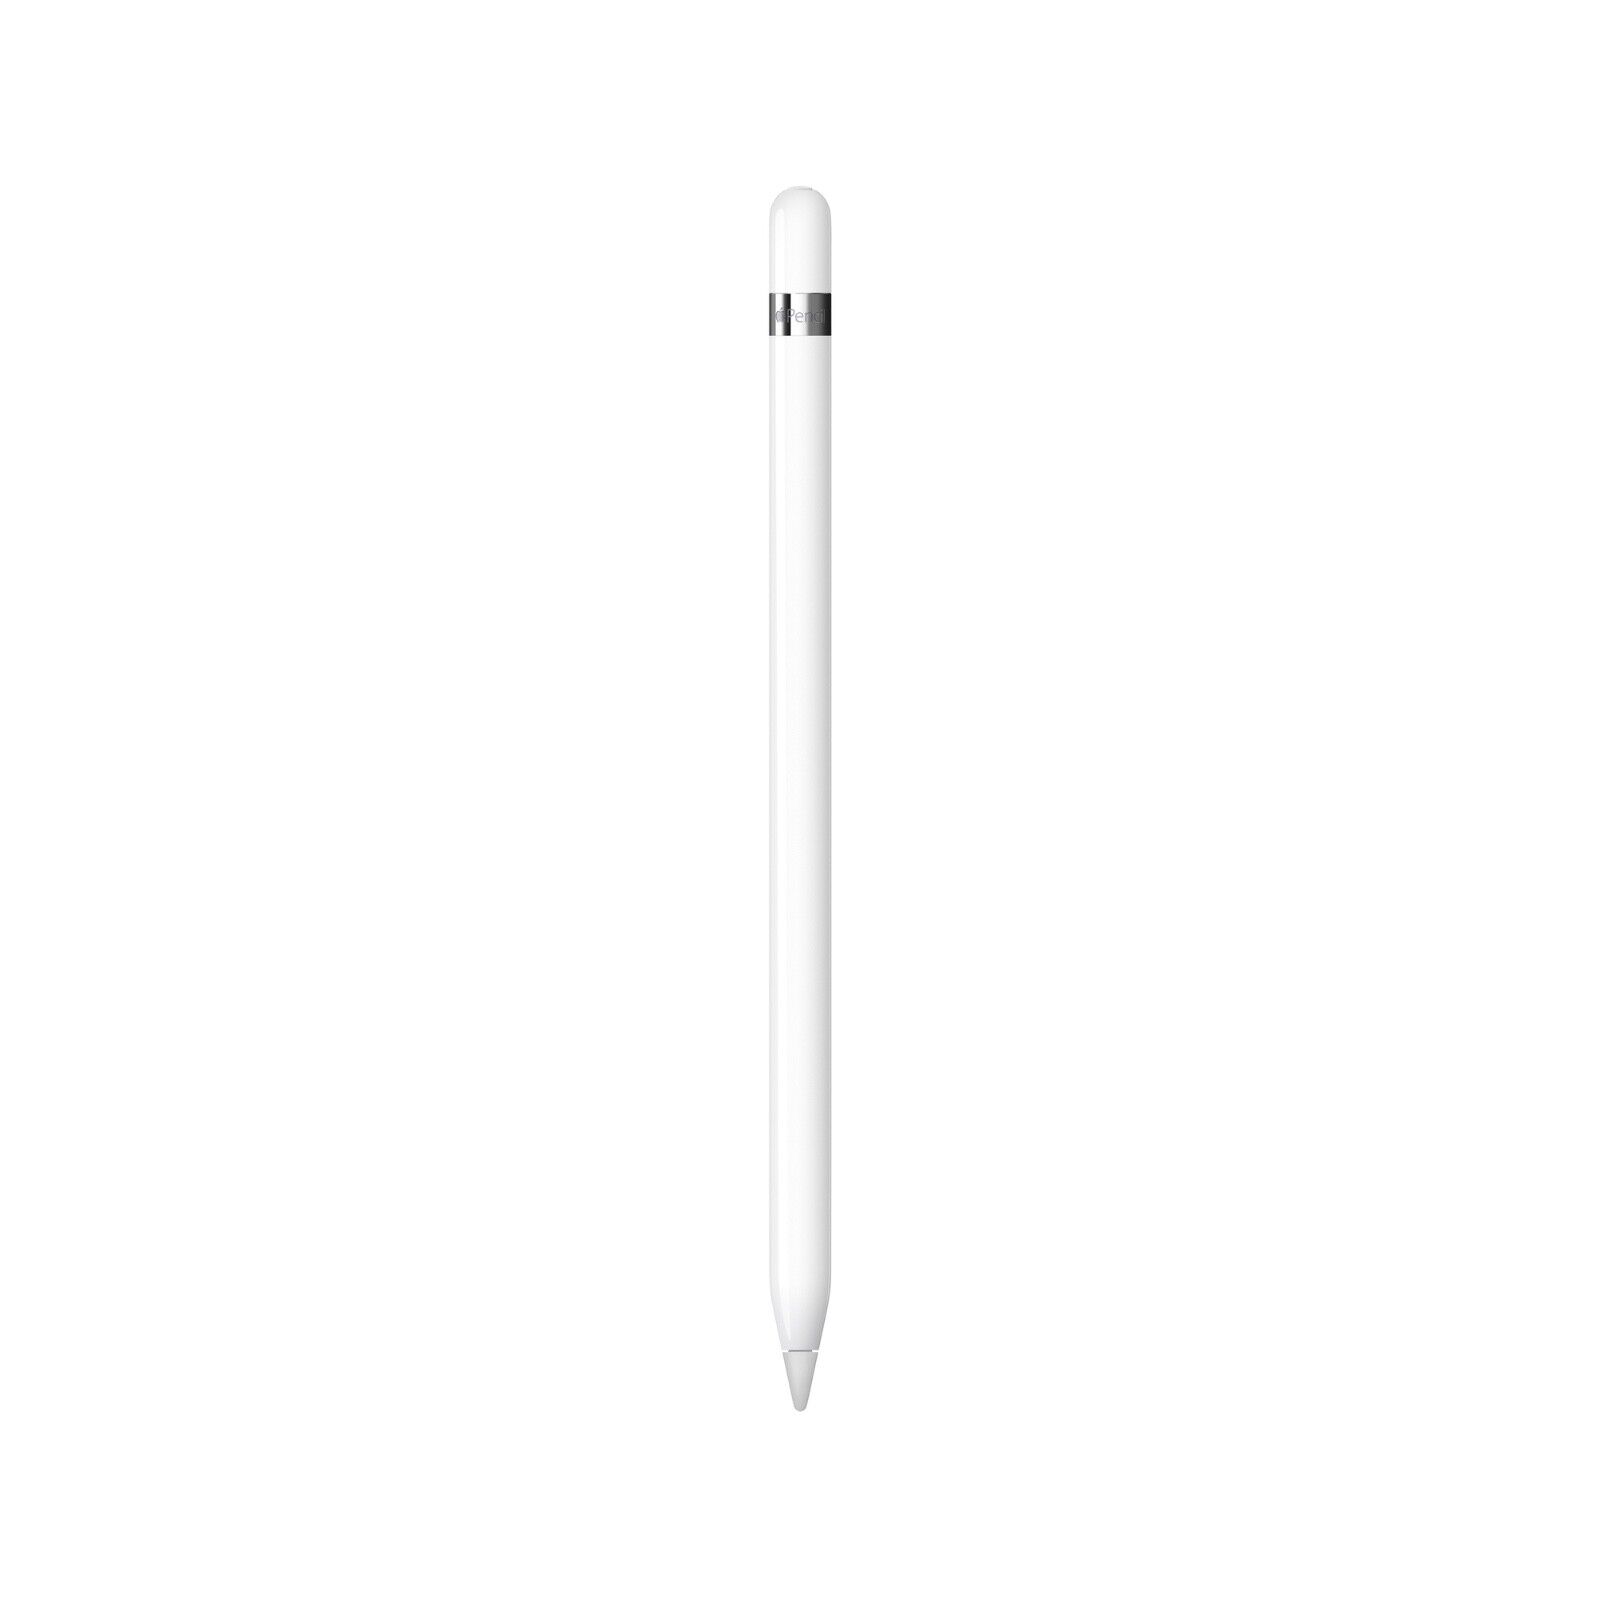 Apple Pencil Stylus for iPad (1st Generation) White (MK0C2AM/A) MSRP $100